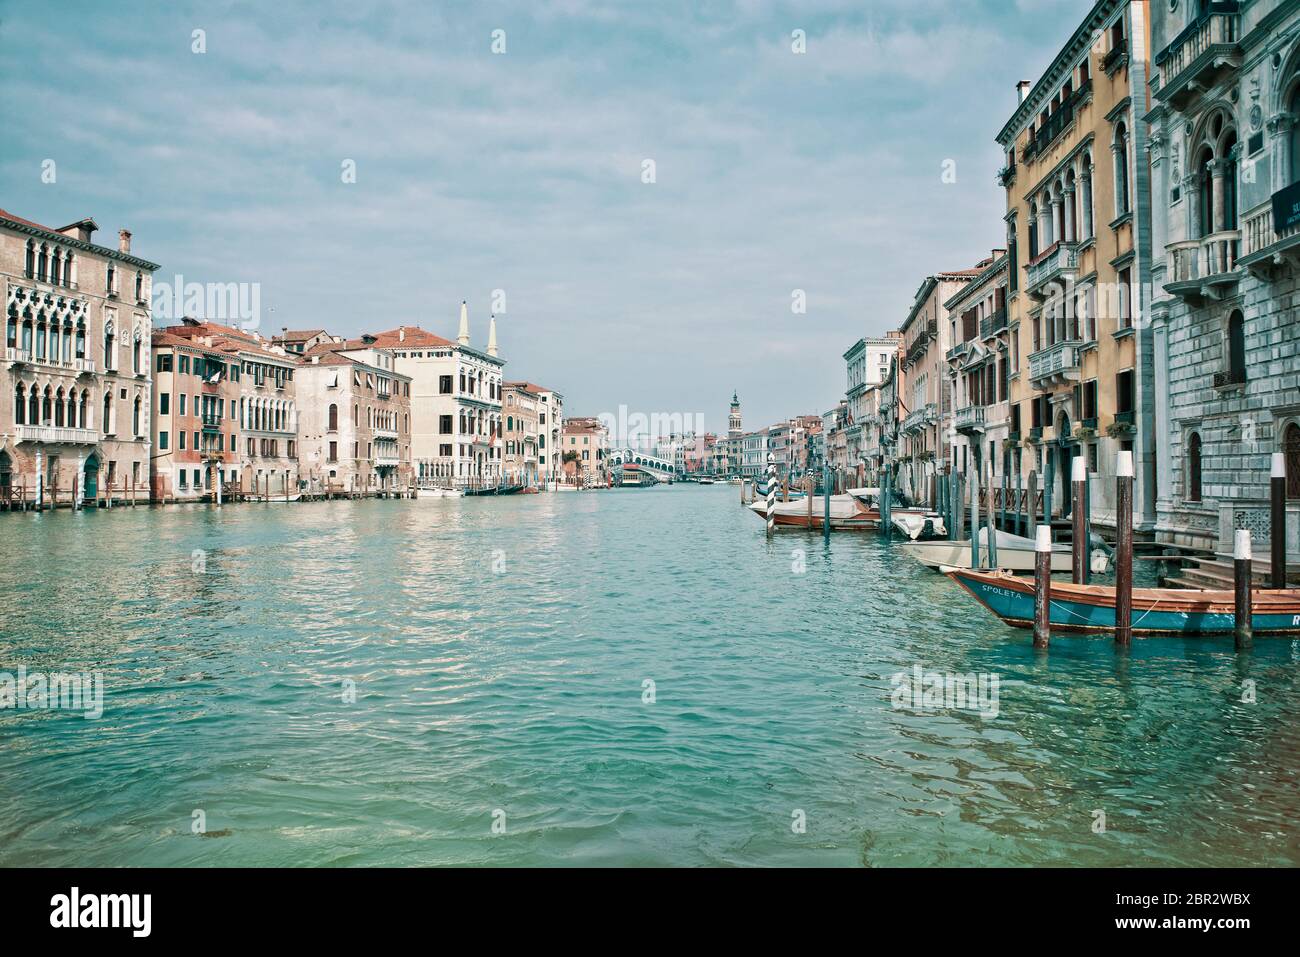 View of the Grand Canal in Venice, Italy in winter Stock Photo